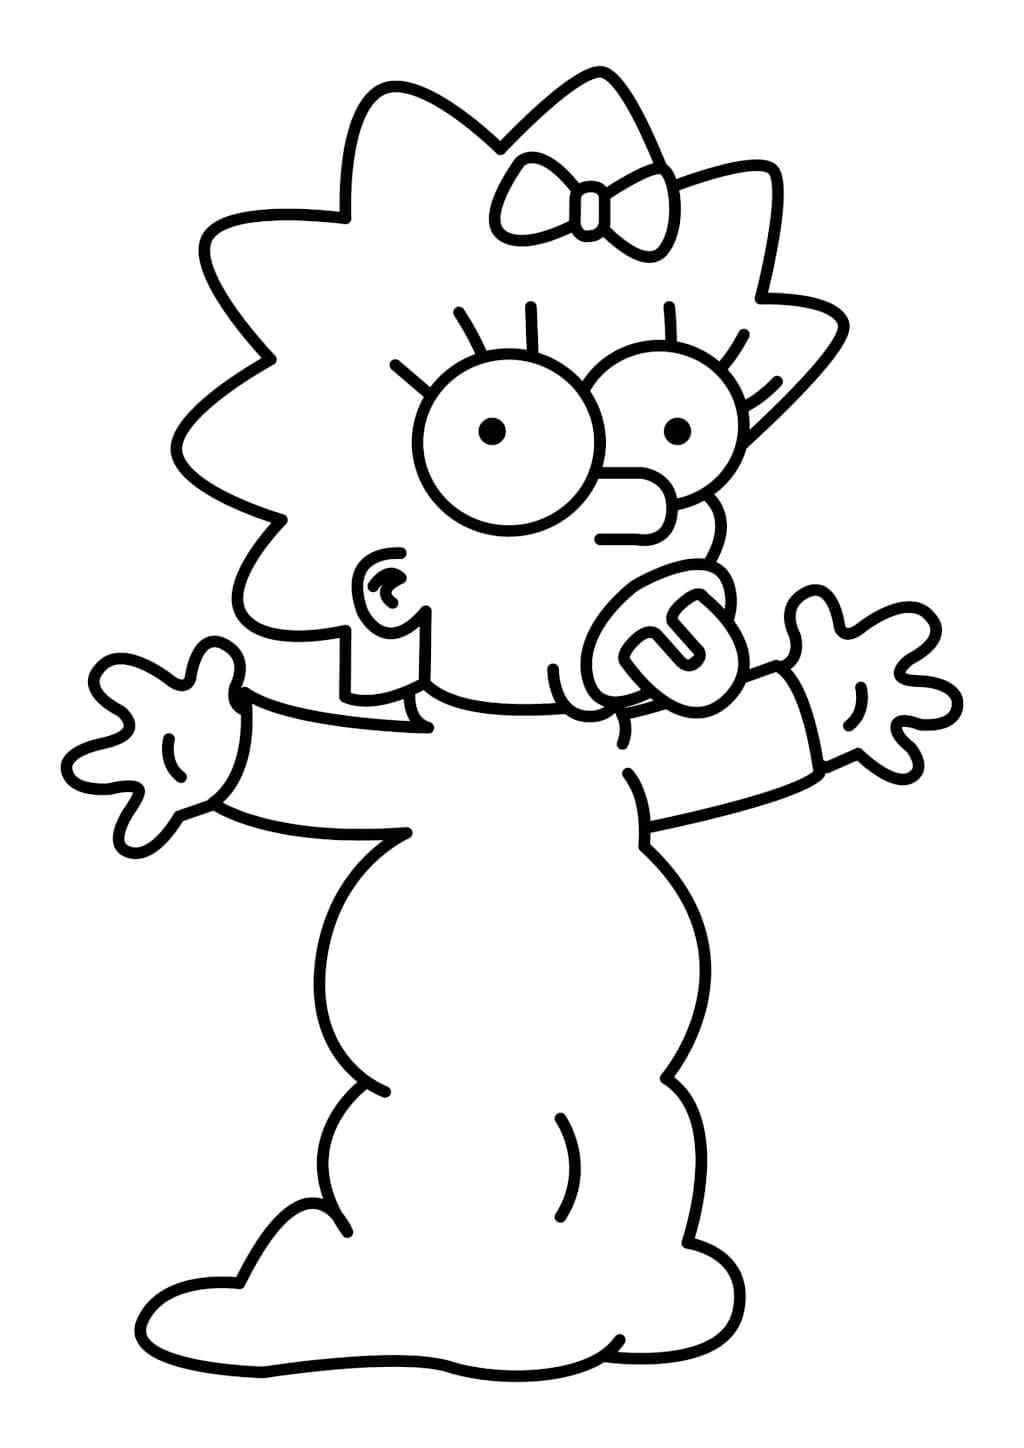 The Smallest Member Of The Simpsons Family Coloring Page